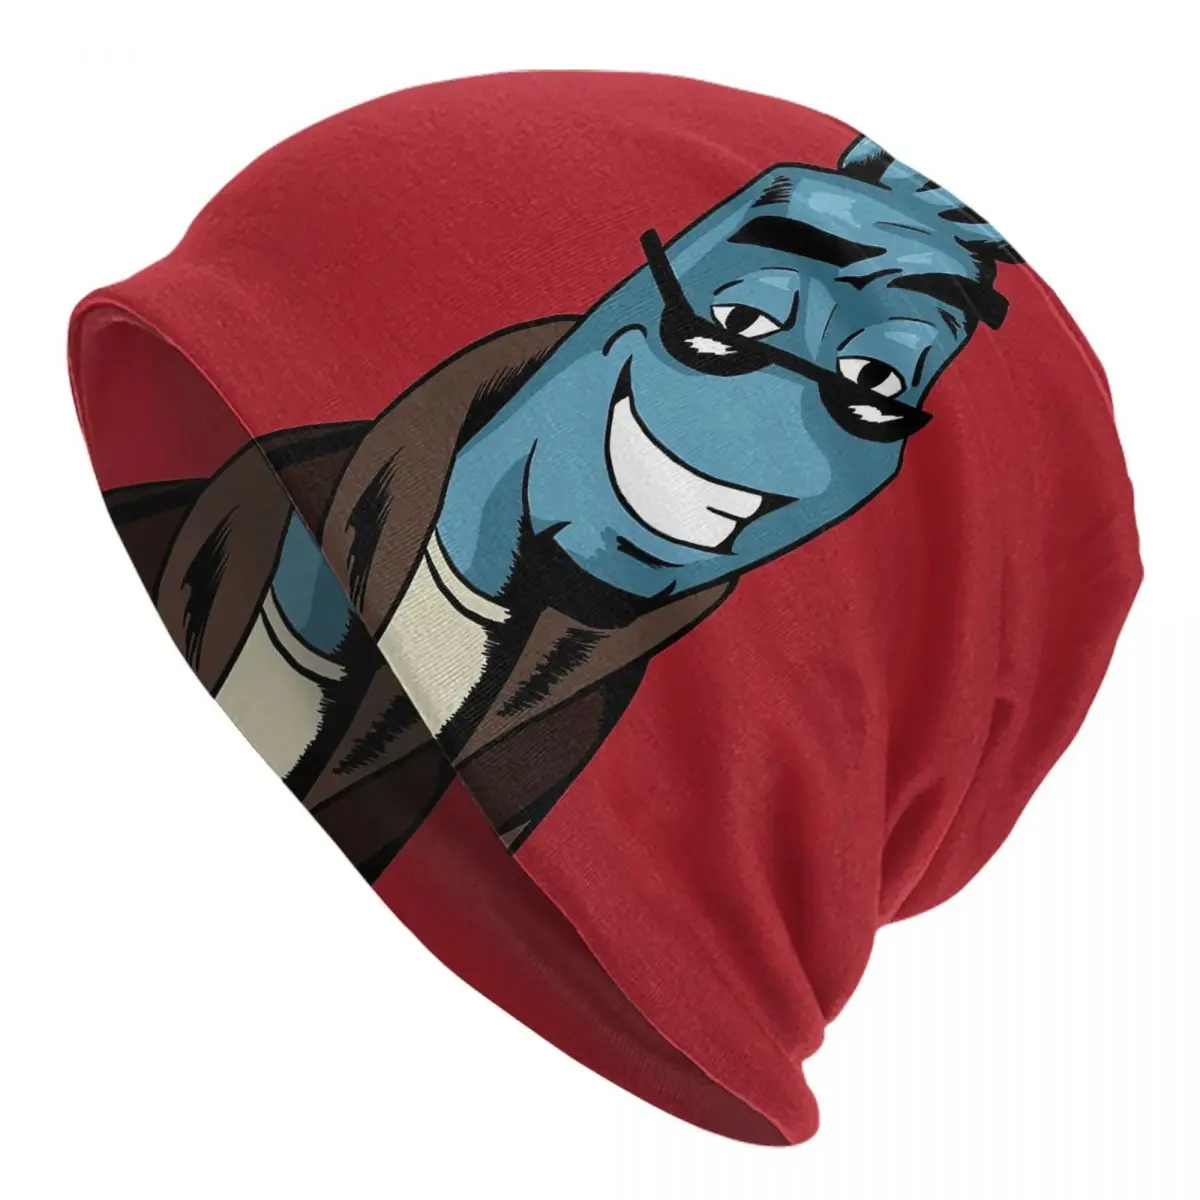 Osmosis Jones Adult Men's Women's Knit Hat Keep warm winter Funny knitted hat